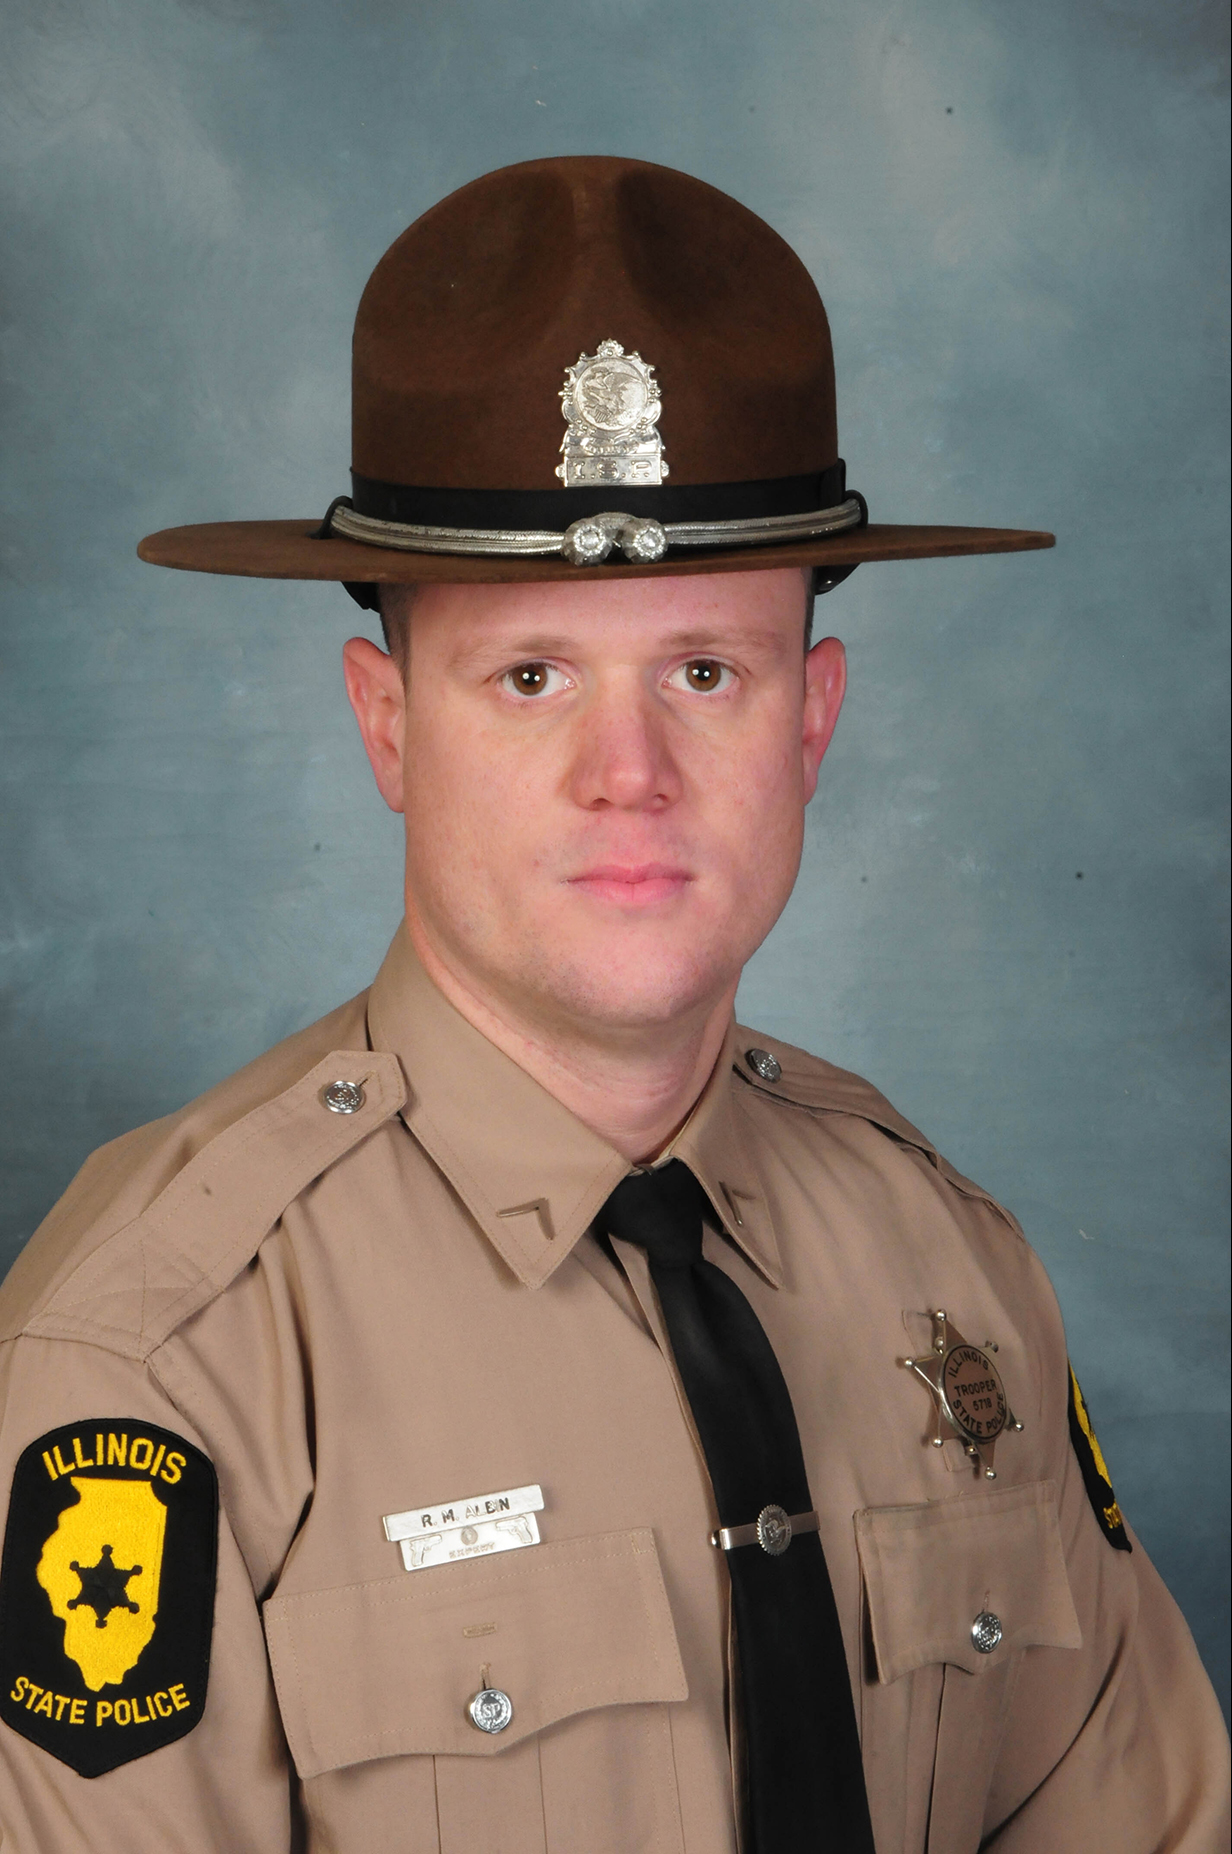 Illinois State Police Mourns The Loss Of Fellow Trooper Got Your 6